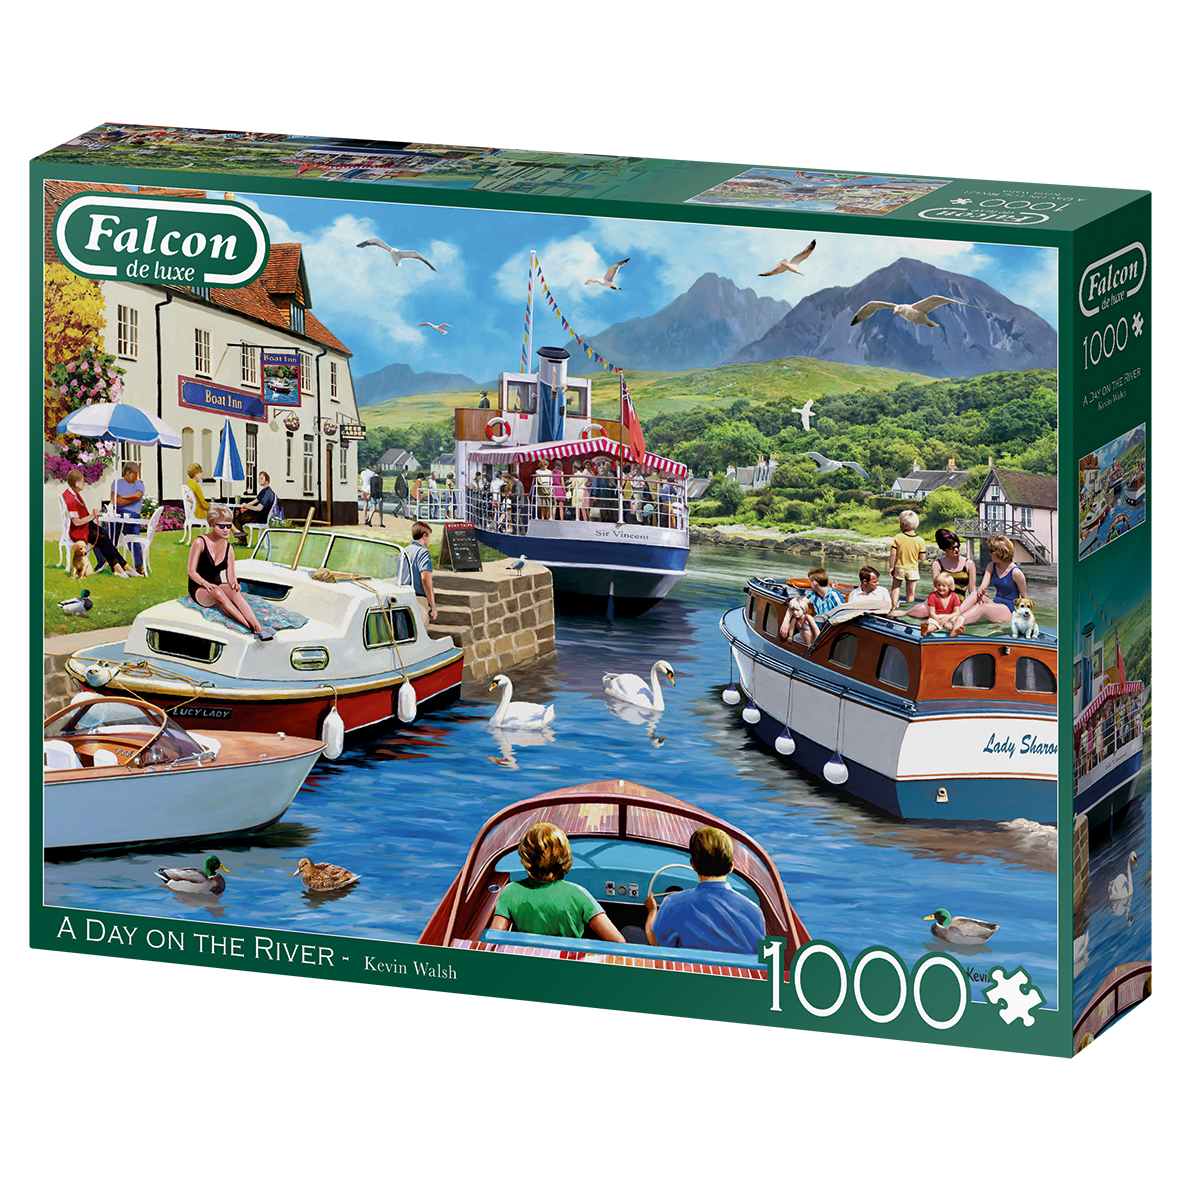 FALCON A DAY ON THE RIVER 1000 PIECE JIGSAW PUZZLE